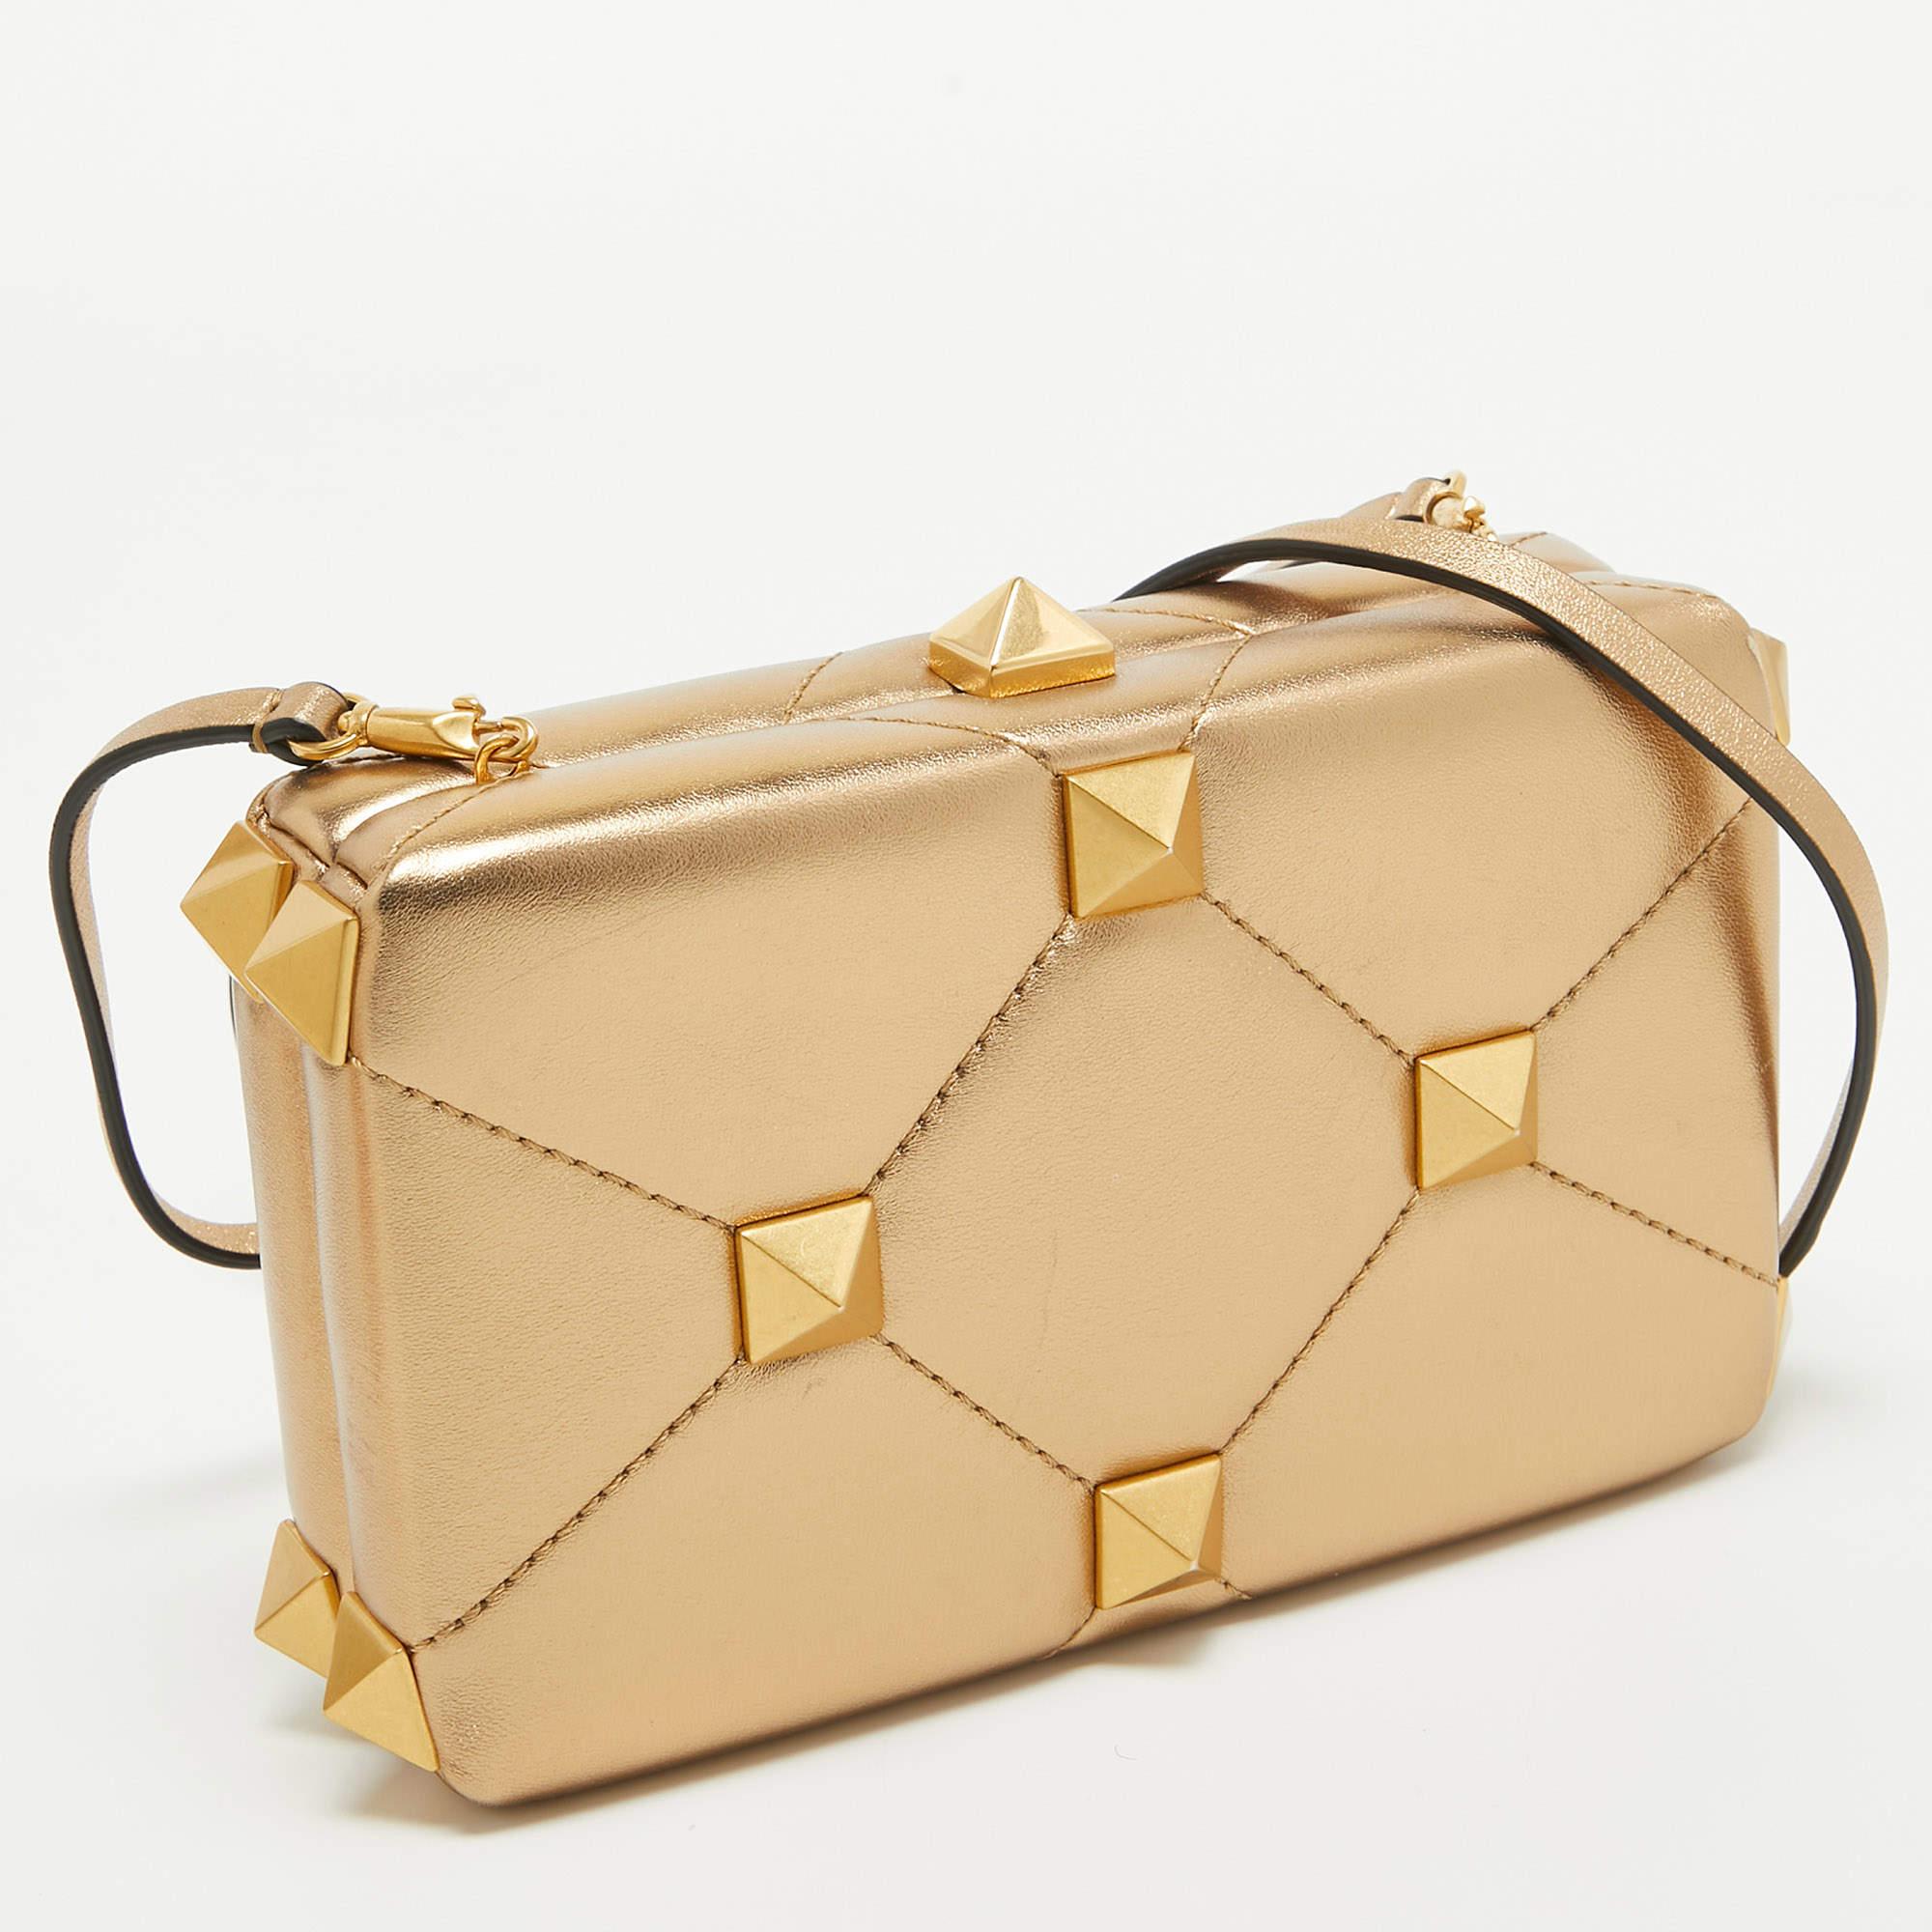 This Valentino clutch is a creation marked by excellent craftsmanship and refined style. This leather clutch is crafted with skill and impeccably finished to be a luxurious accessory in your hand on on your shoulder.

